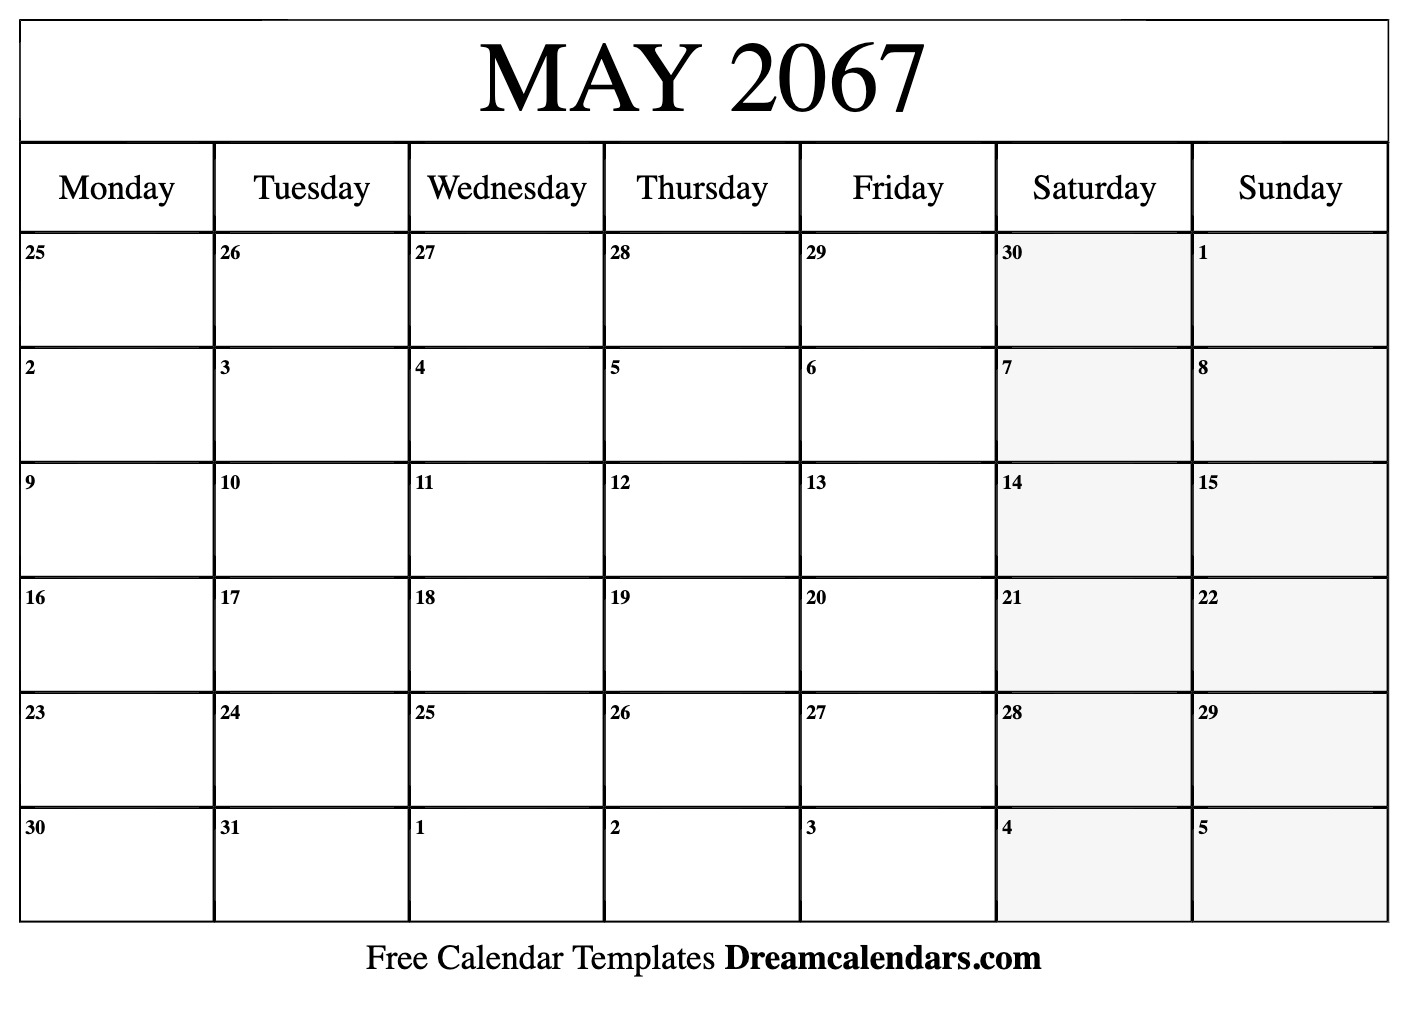 May 2067 Calendar - Free Printable with Holidays and Observances